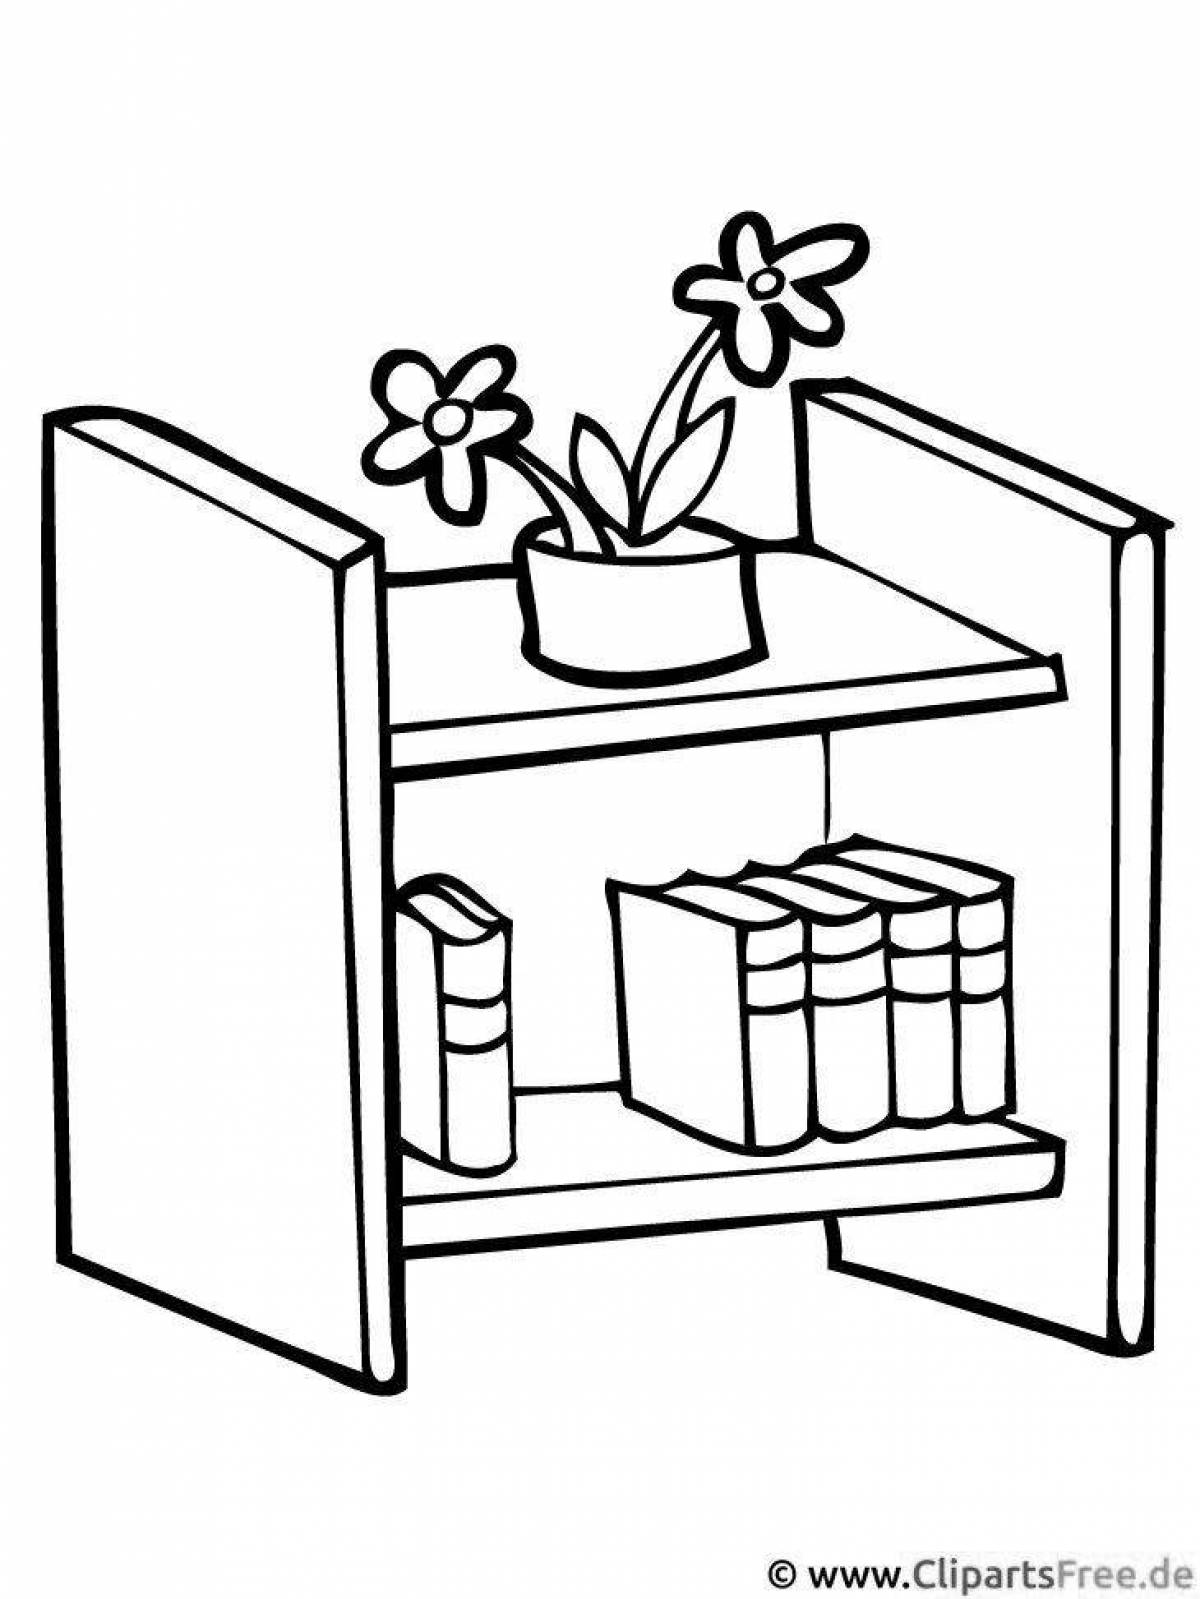 Shelf dramatic coloring page